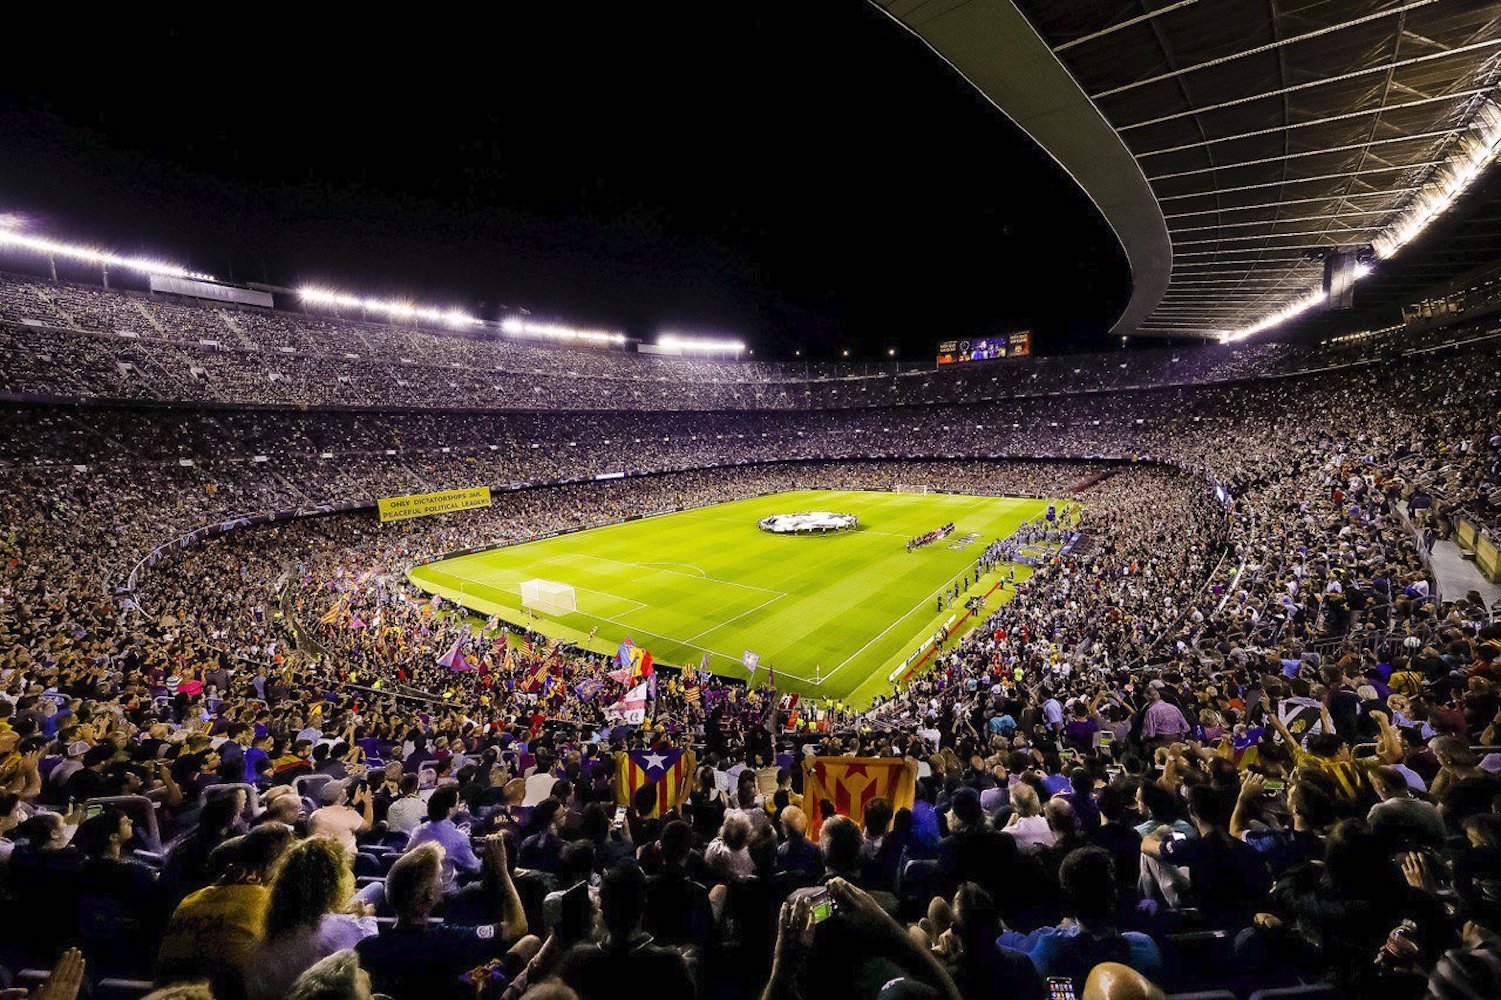 Catalan protest action at Barça-Real Madrid match "will be seen live on TV"